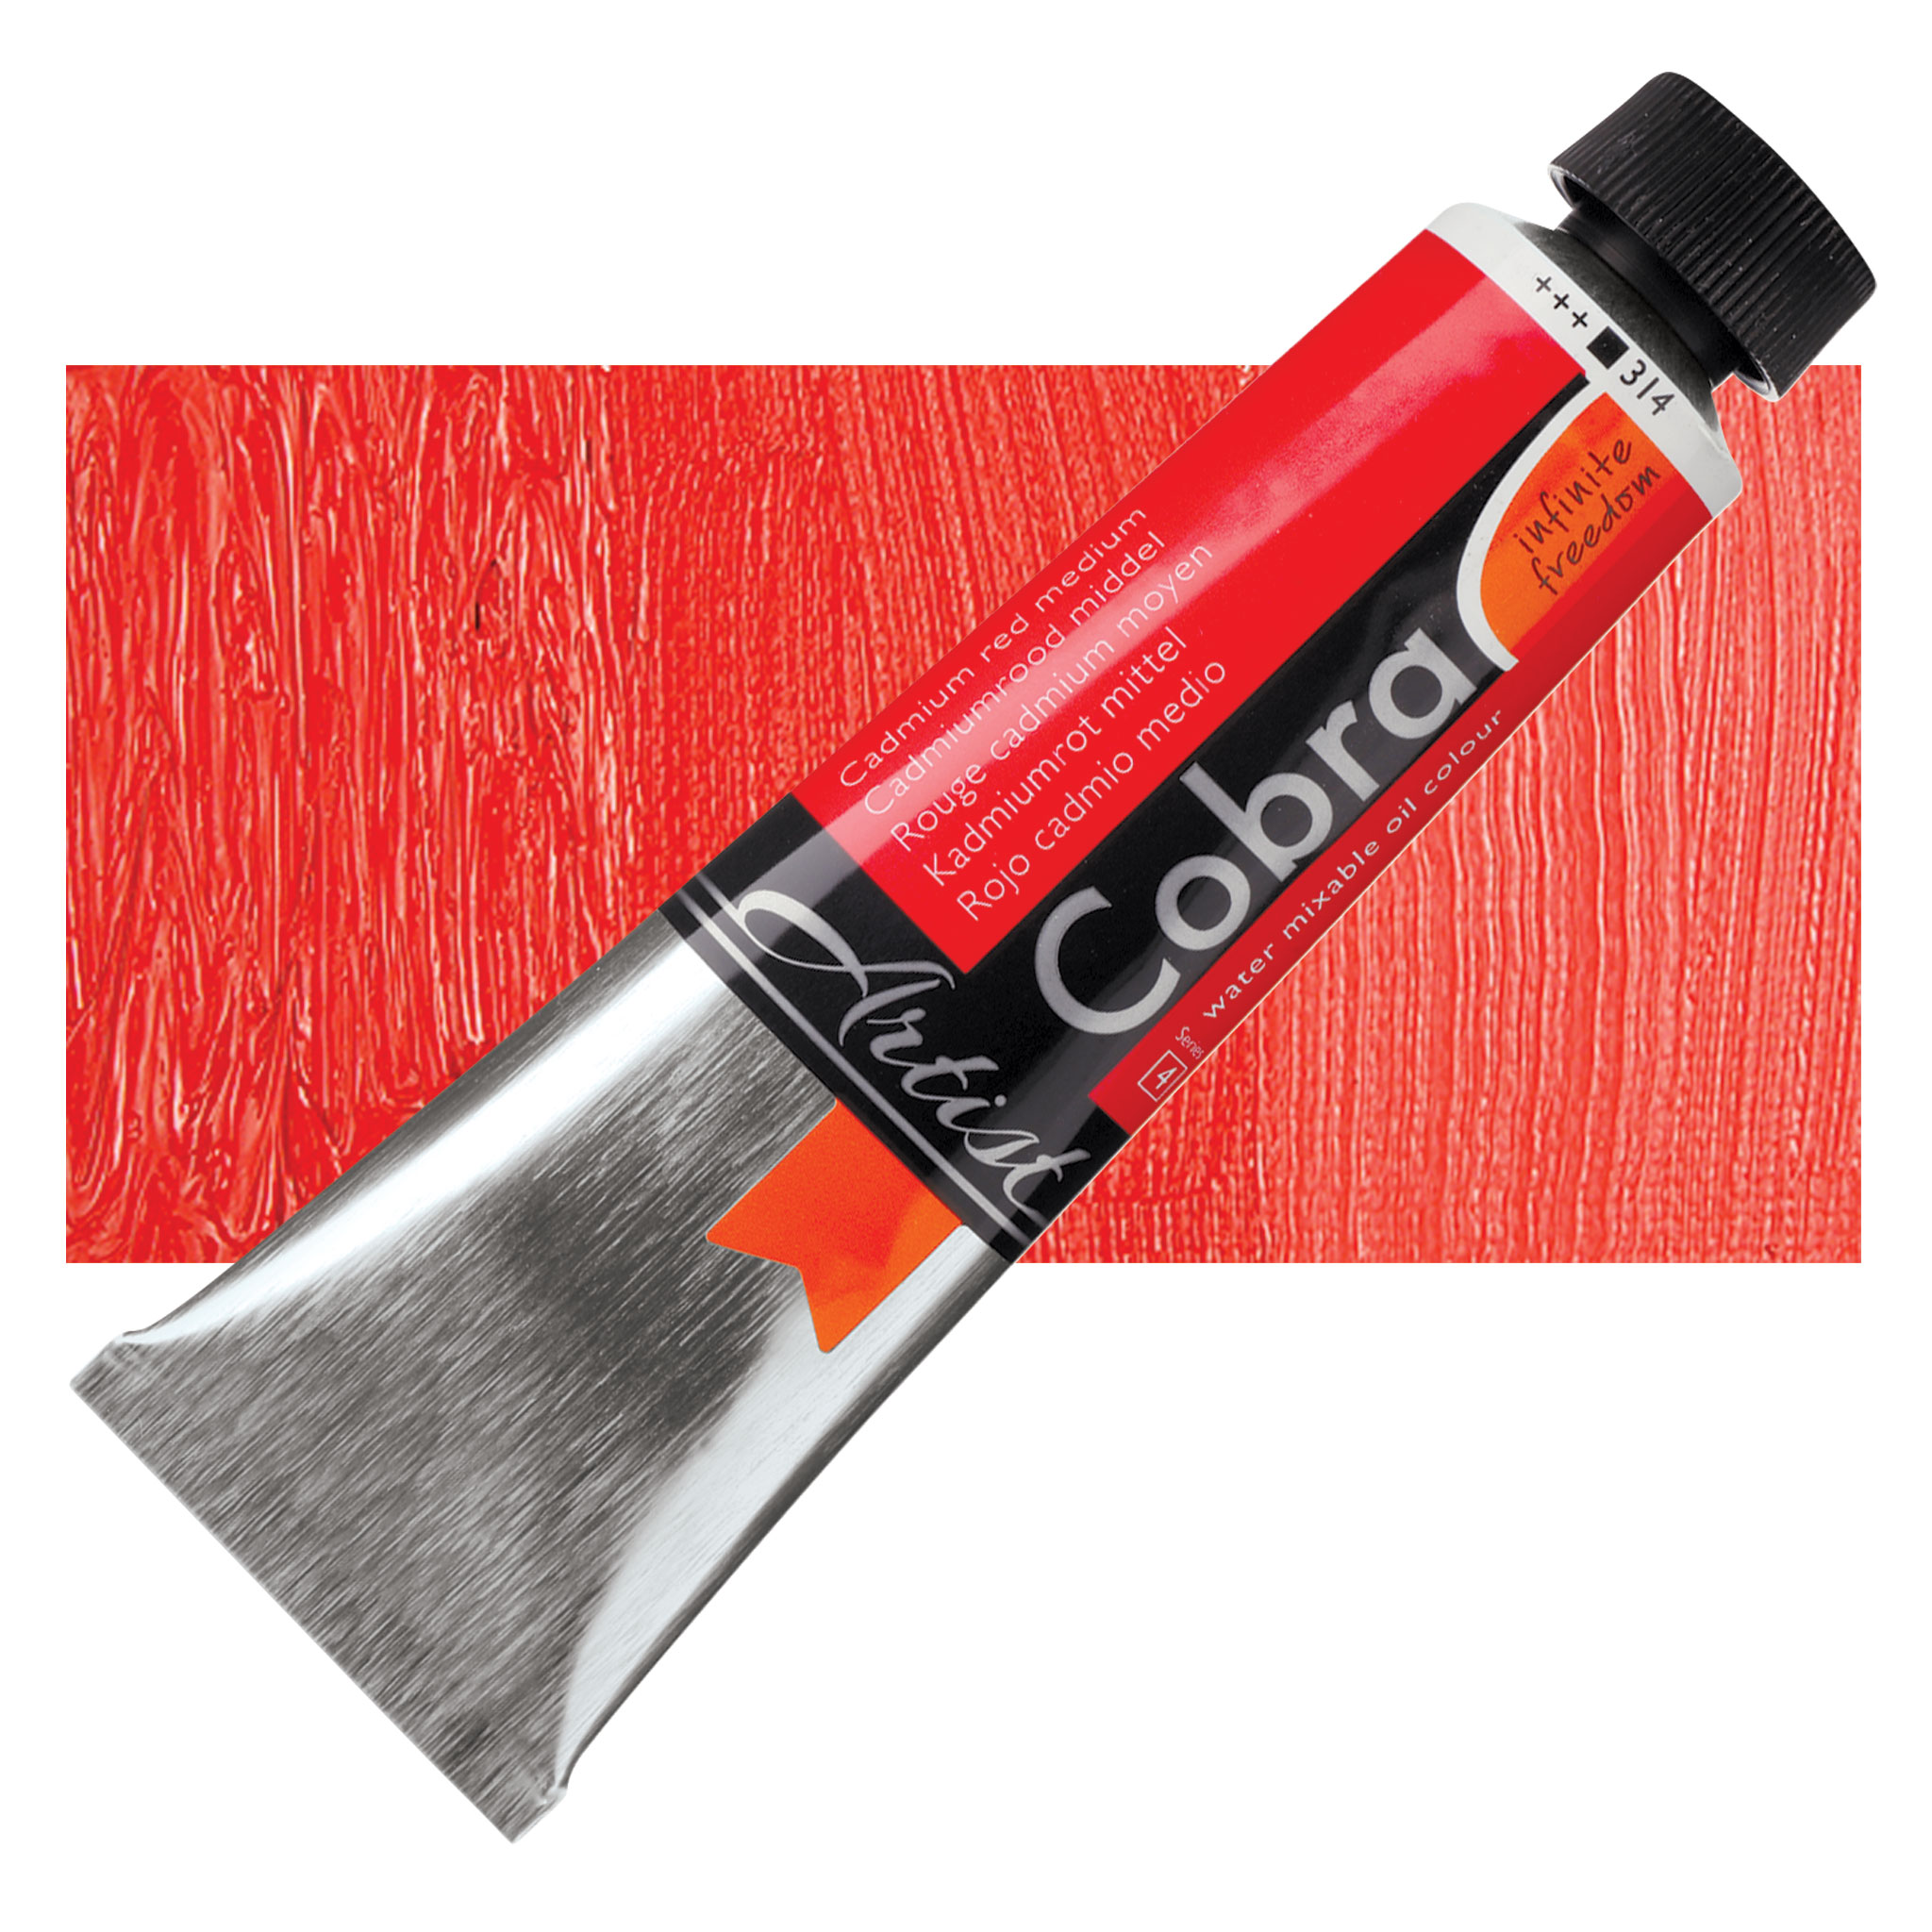 Cobra - water soluble oil paints. Does anyone use them? Is this just some  lame mimic or they actually work like traditional oil paints and are of  same quality? : r/painting